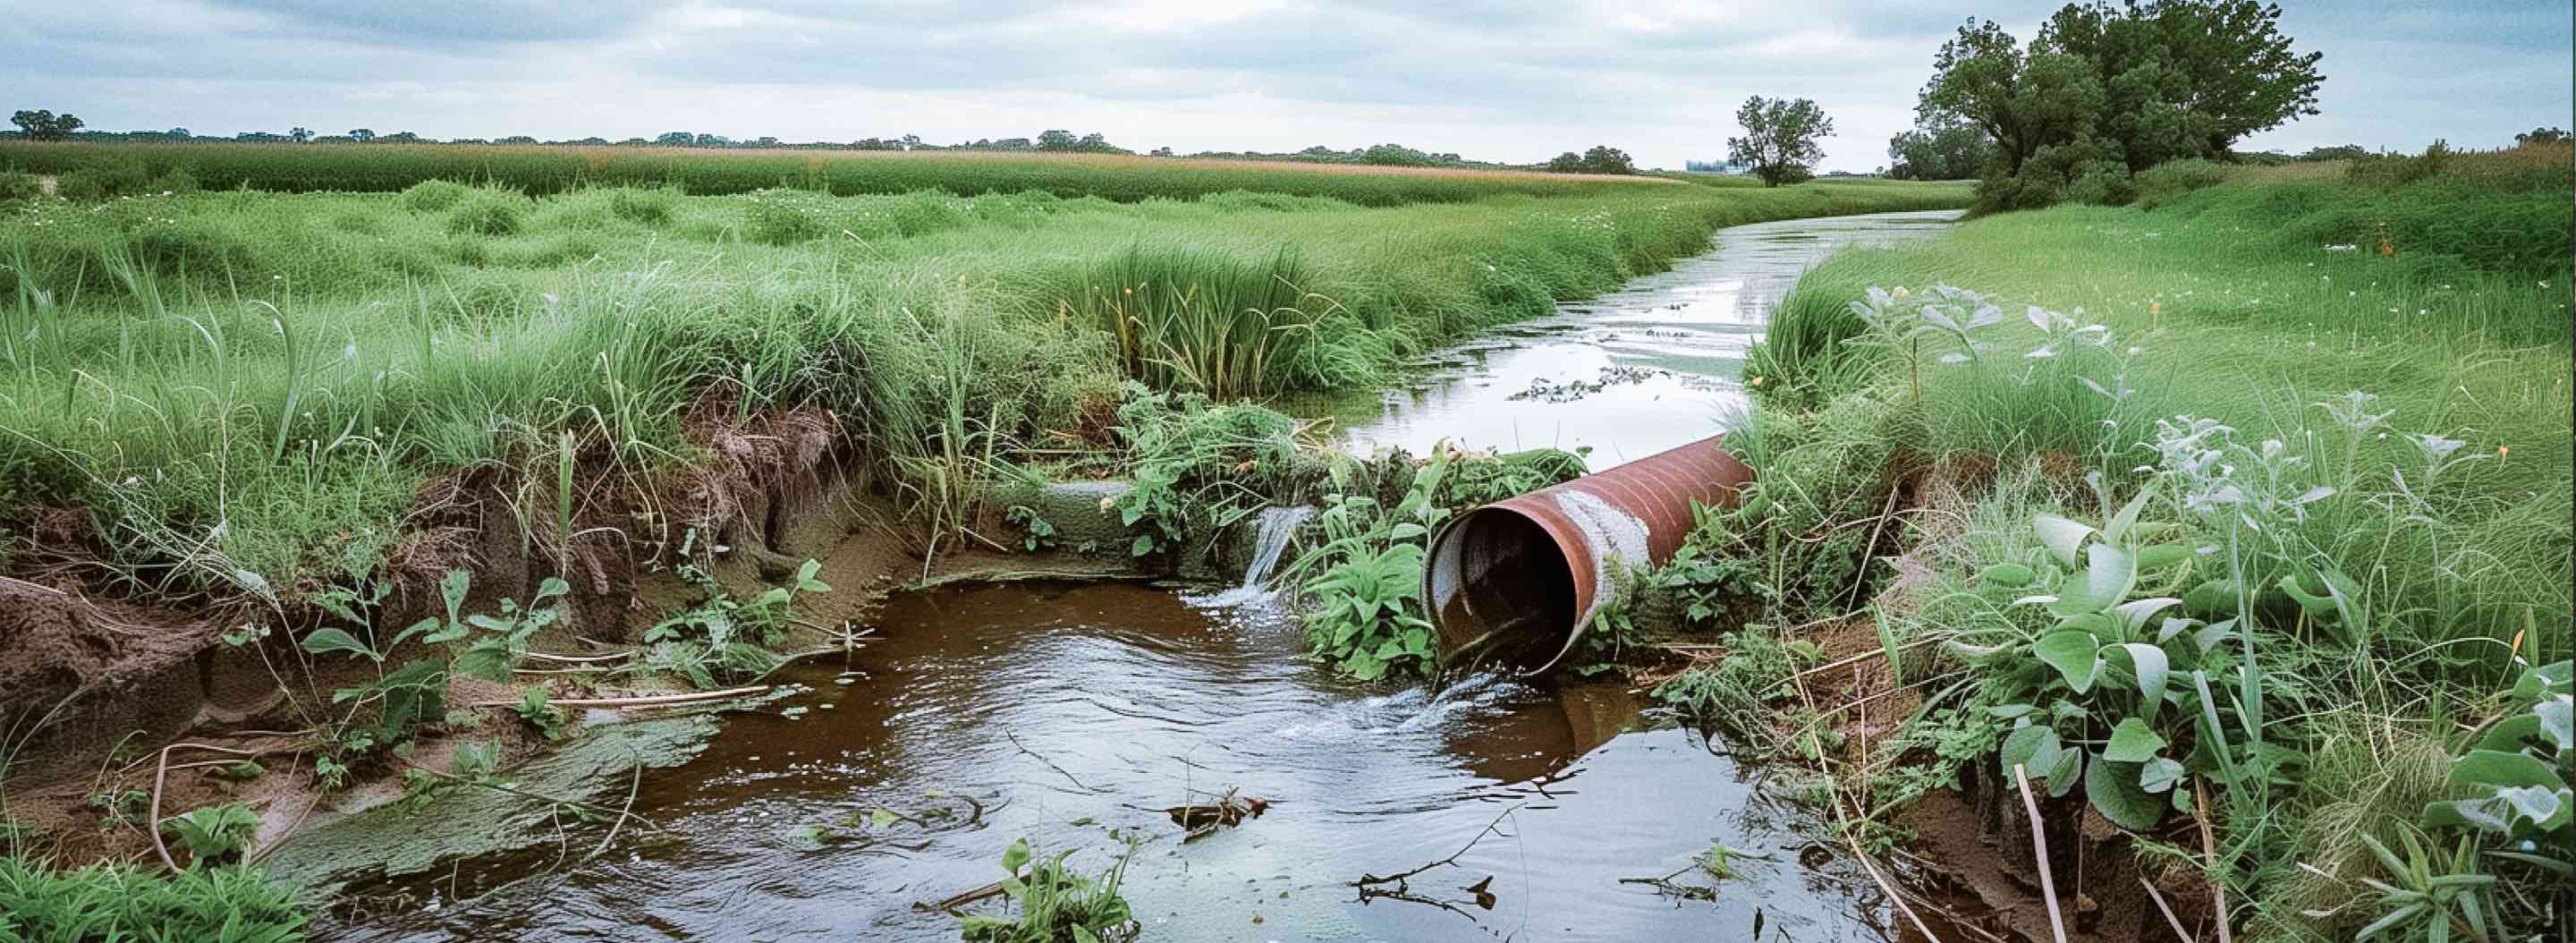 Water runoff exits from a pipe in farm field